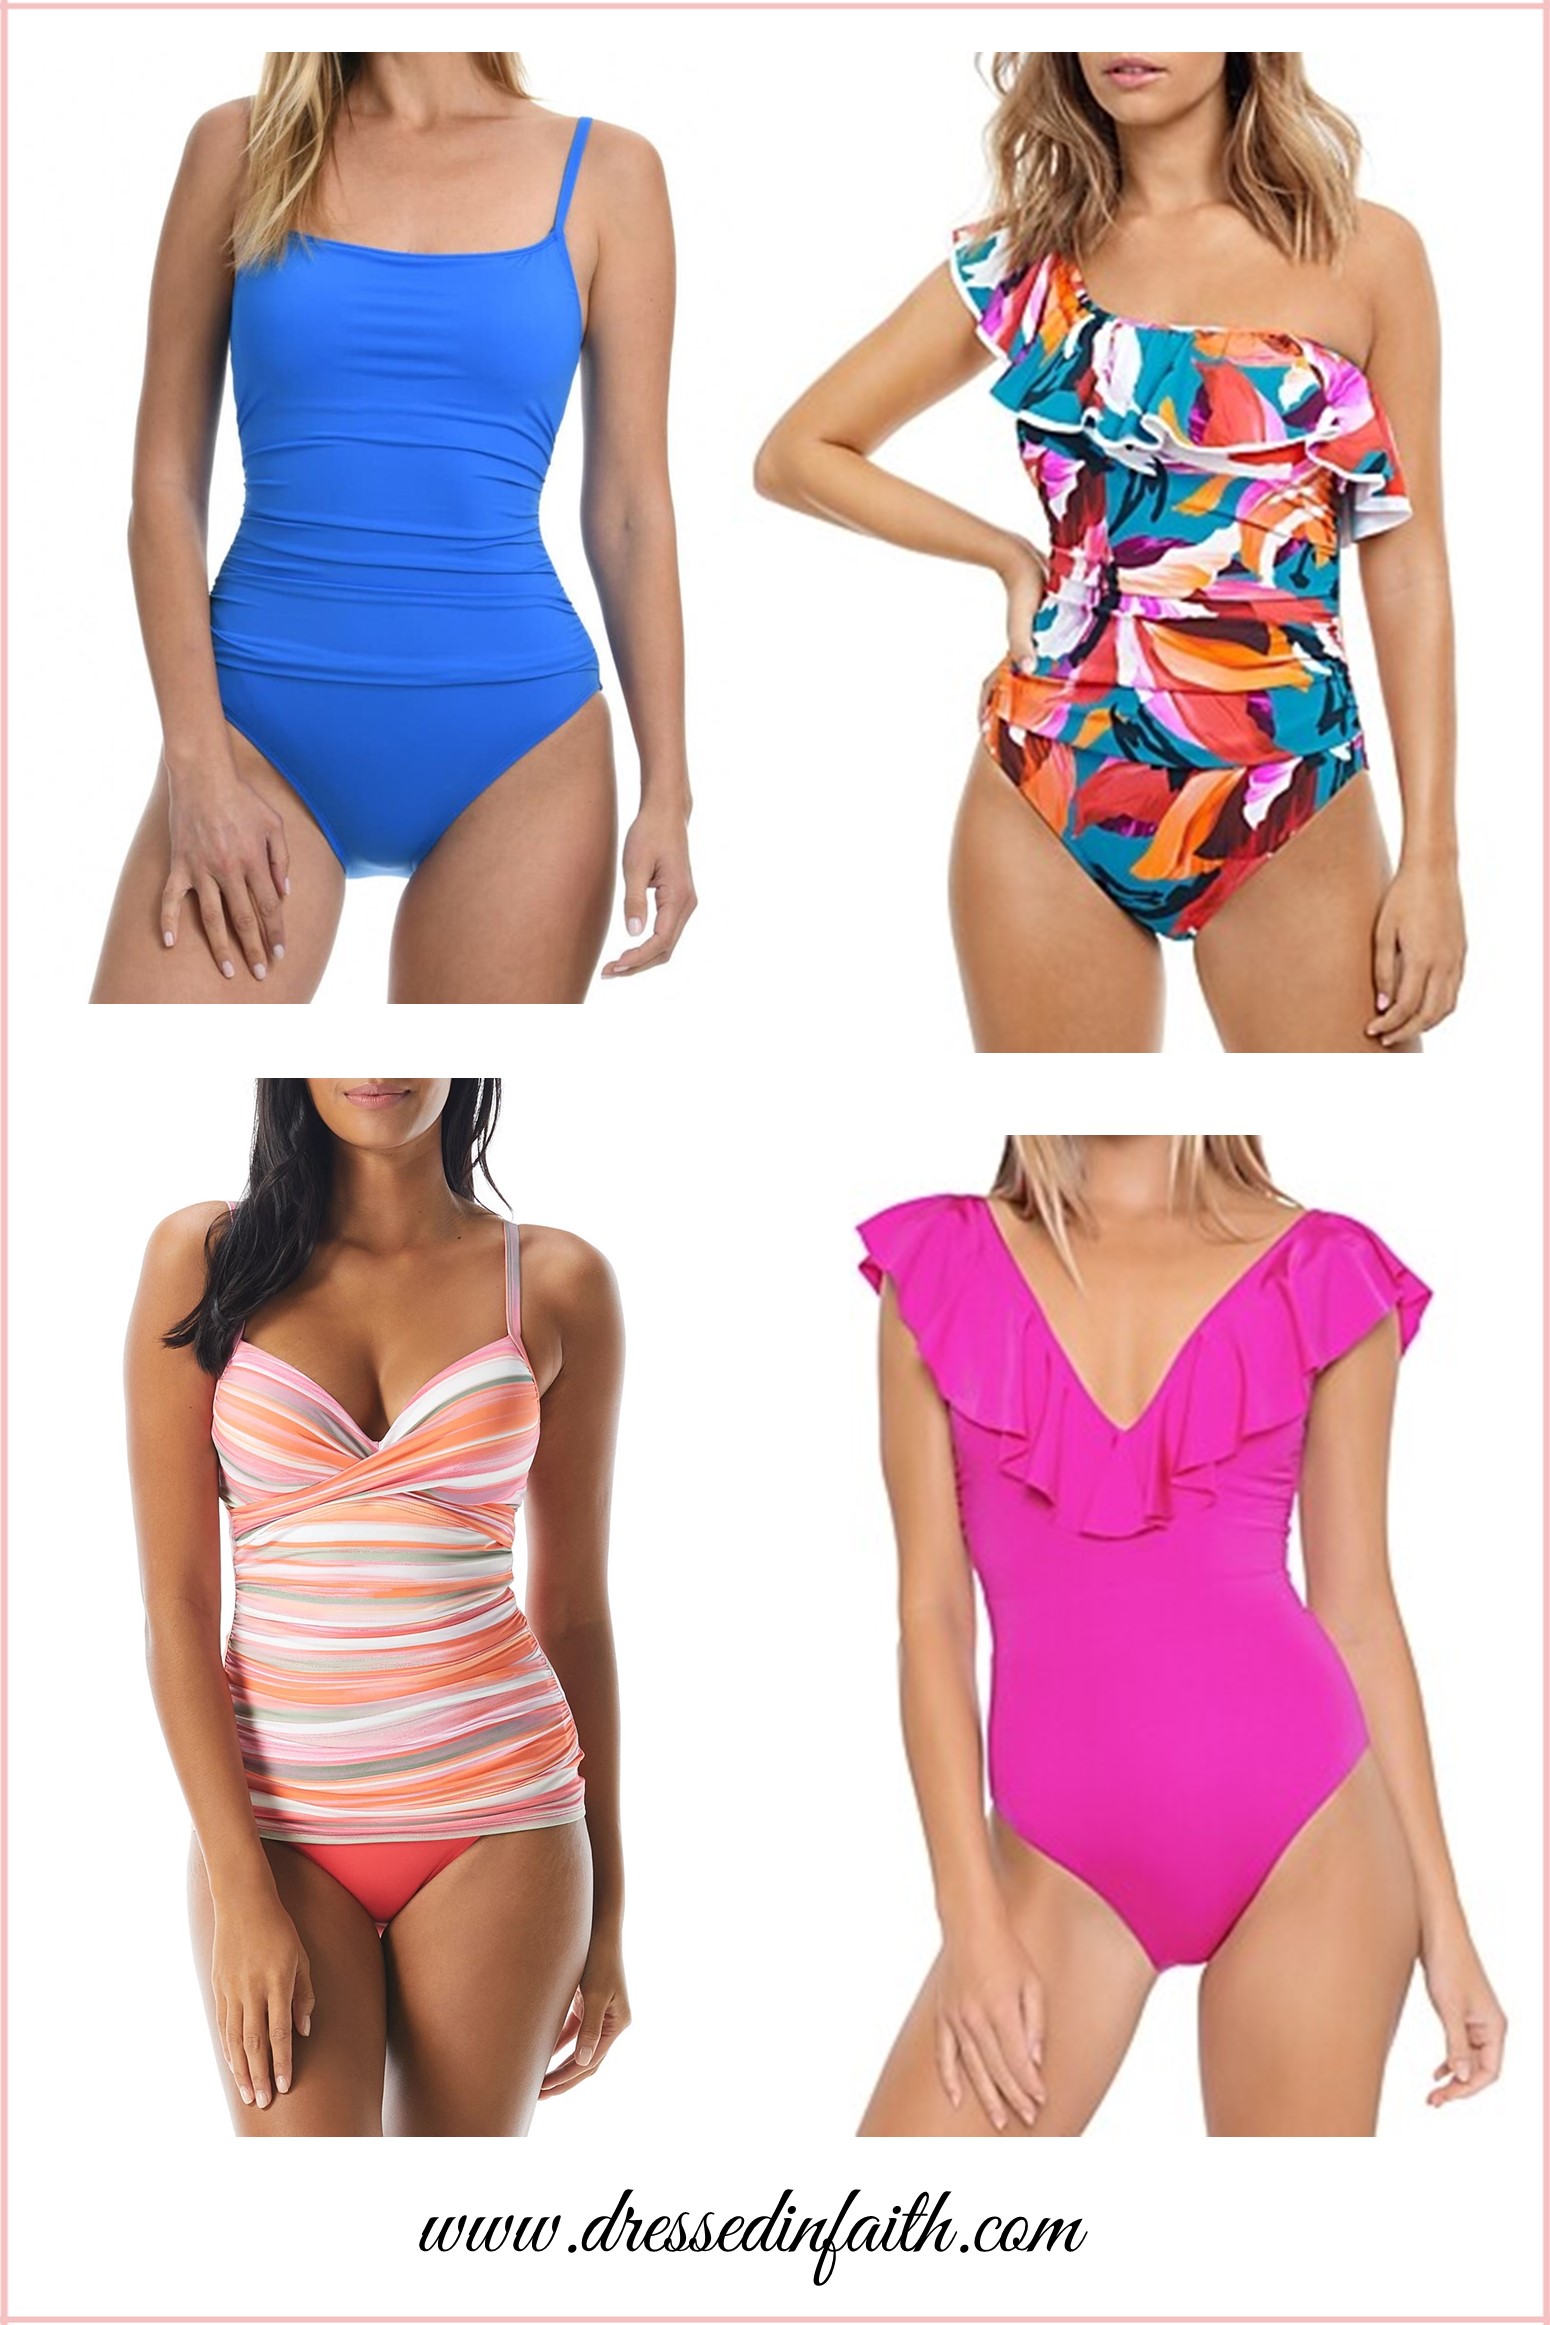 Swimsuit Guide for Women Over 40